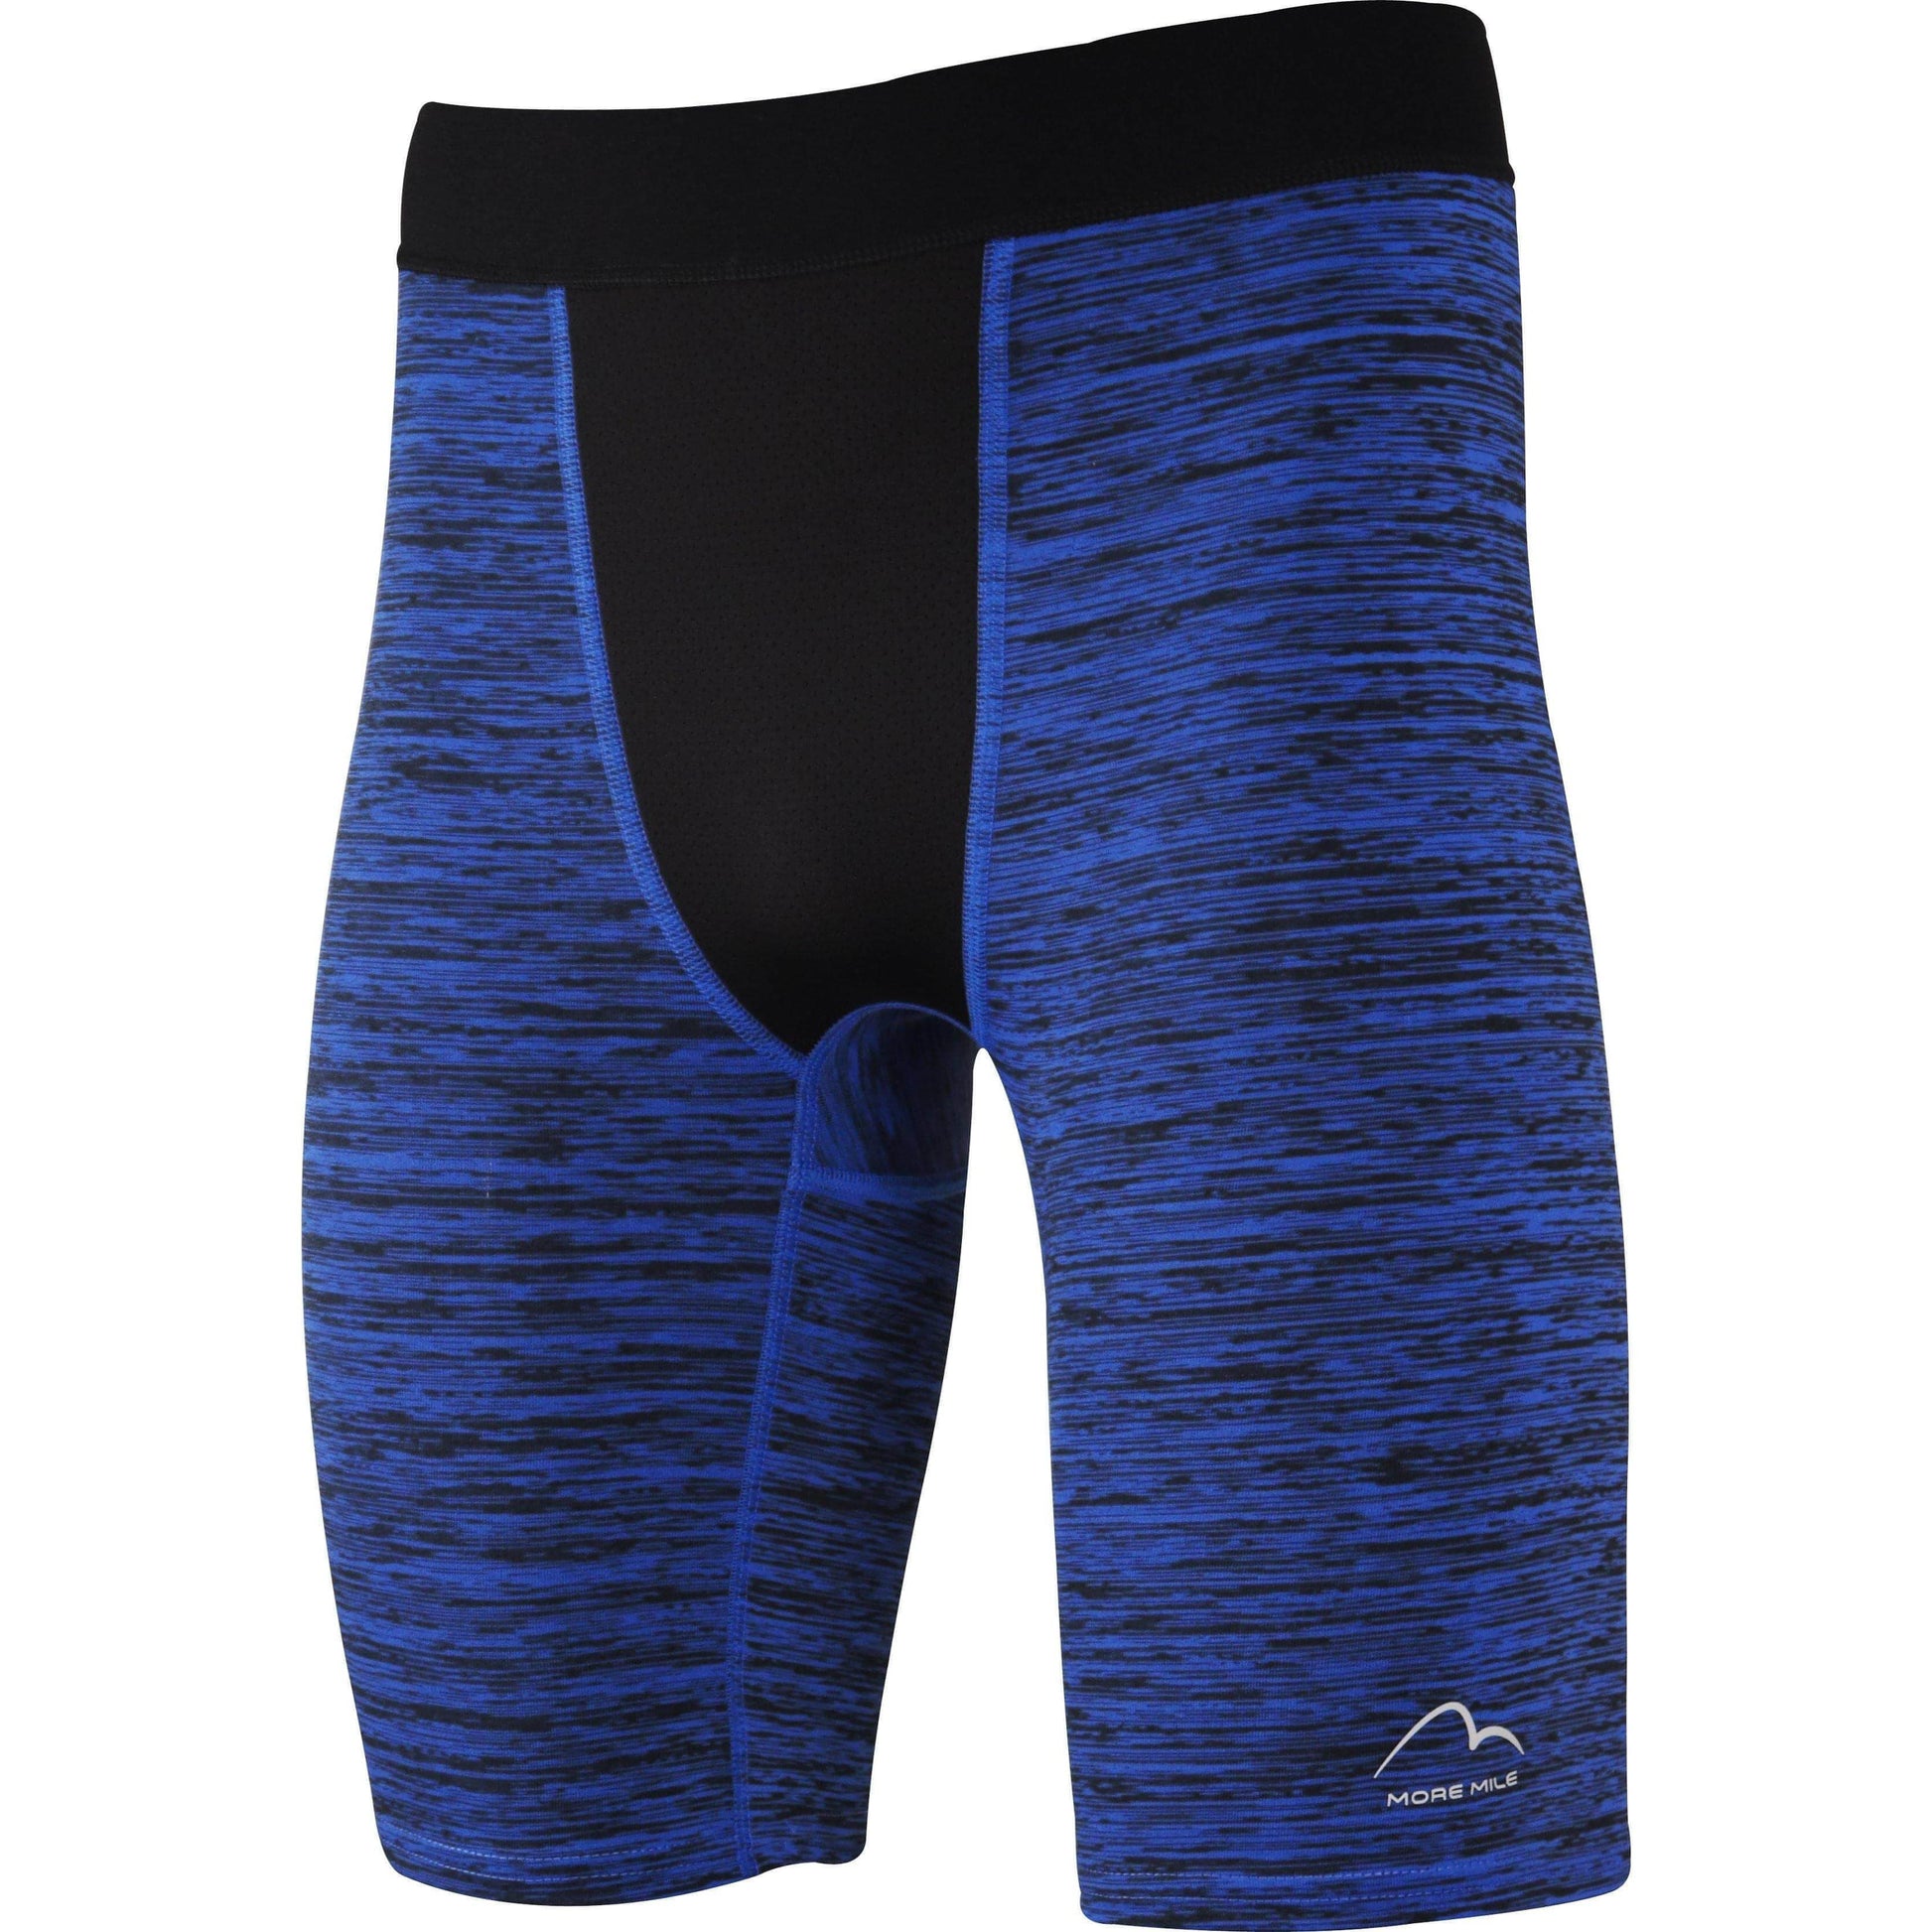 More Mile Train To Run Mens Baselayer Short Tights - Blue - Start Fitness